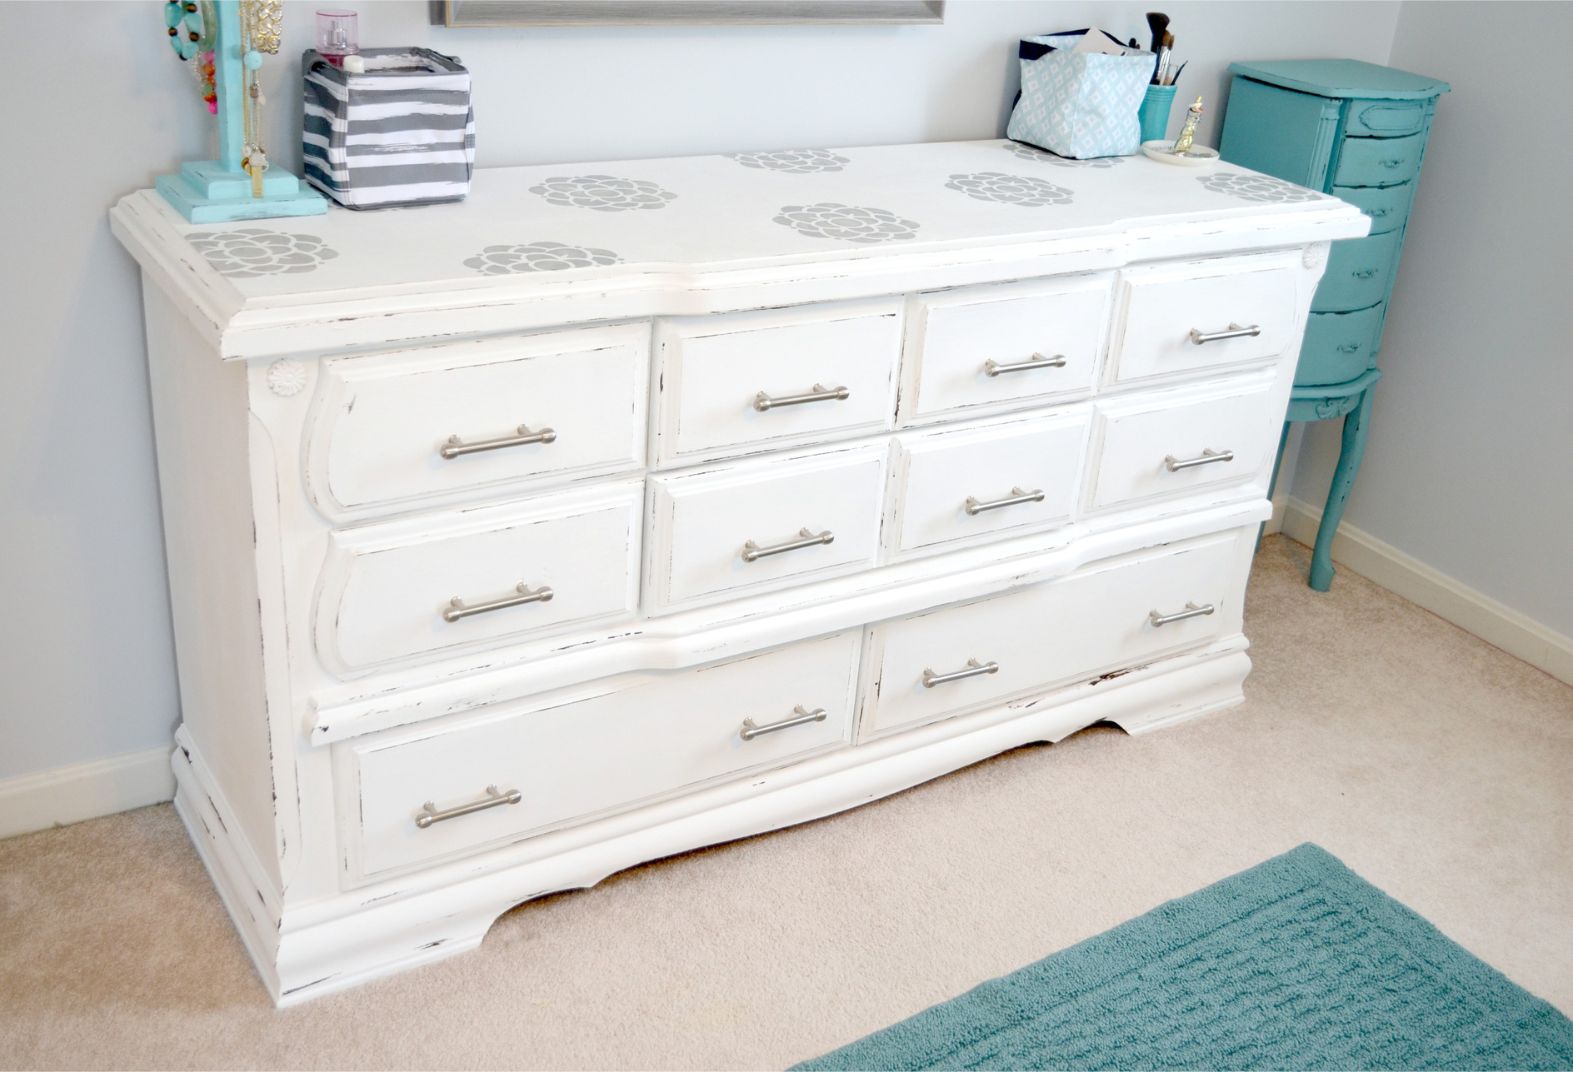 How To Paint A Dresser With Chalk Paint